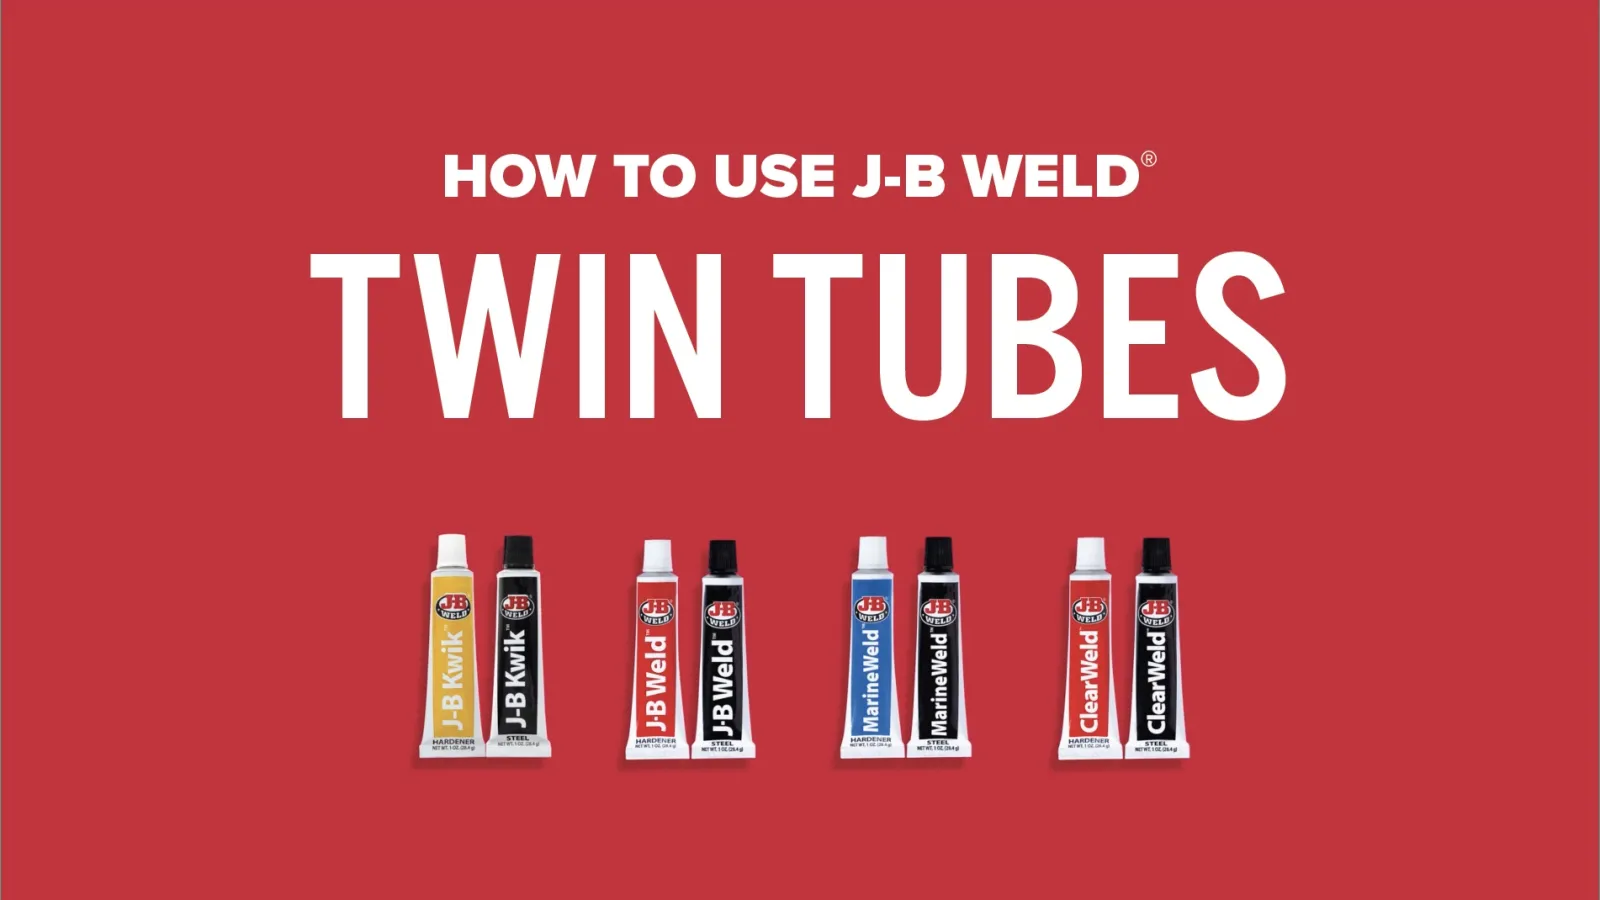 How to Glue Metal with J-B Weld - Video 3 of 3 